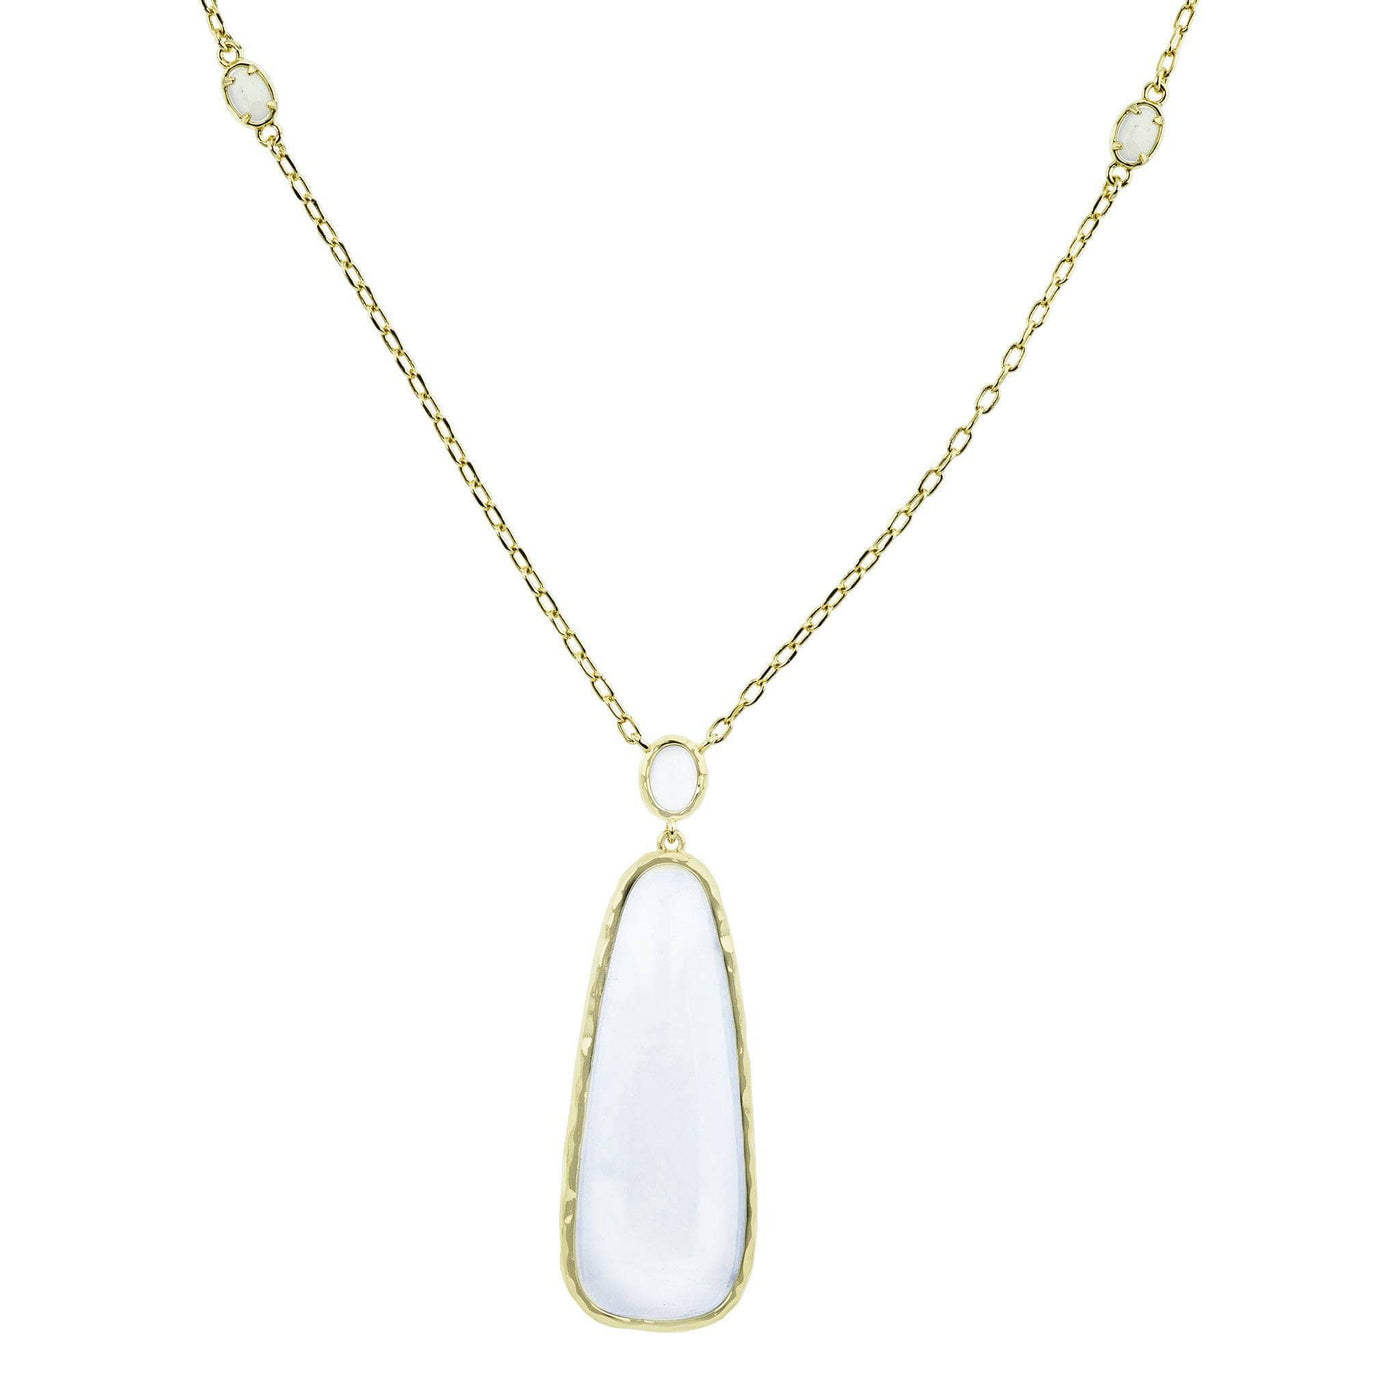 Harlow & Dylan By HEIDI DAUS®"Blue Chalcedony" Natural Beauty Pendant Necklace